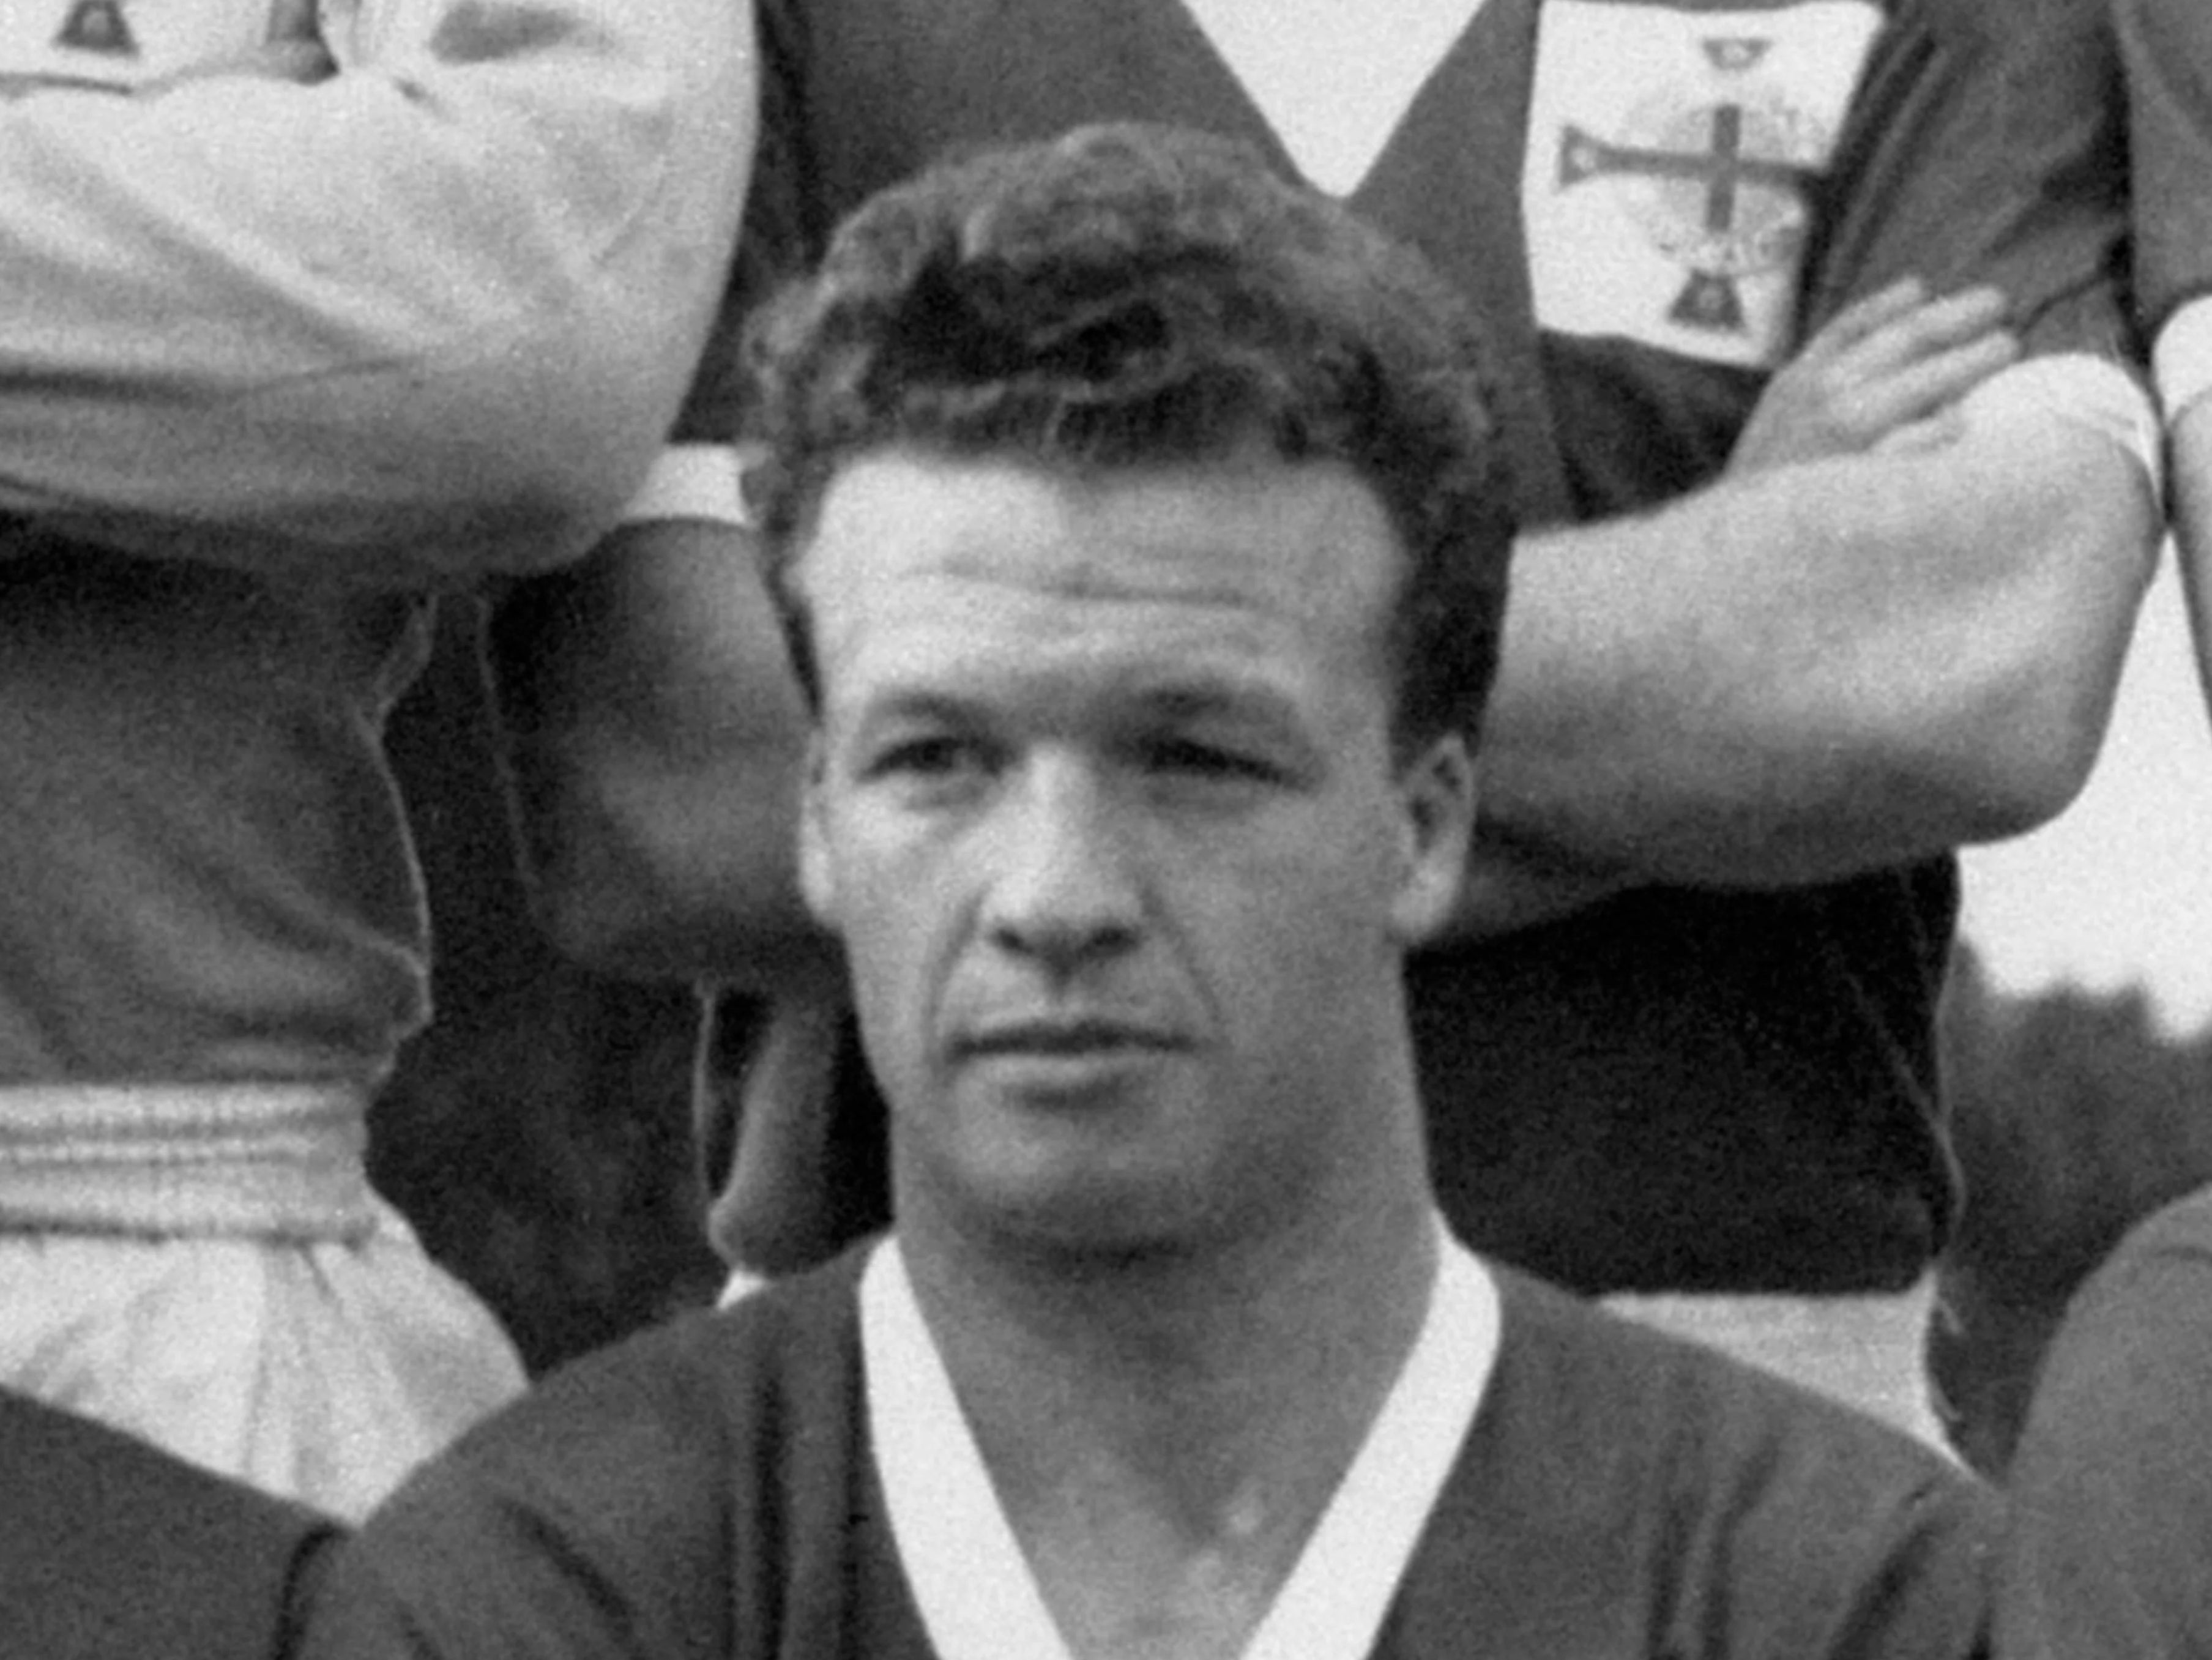 Billy Bingham both played for and managed Northern Ireland